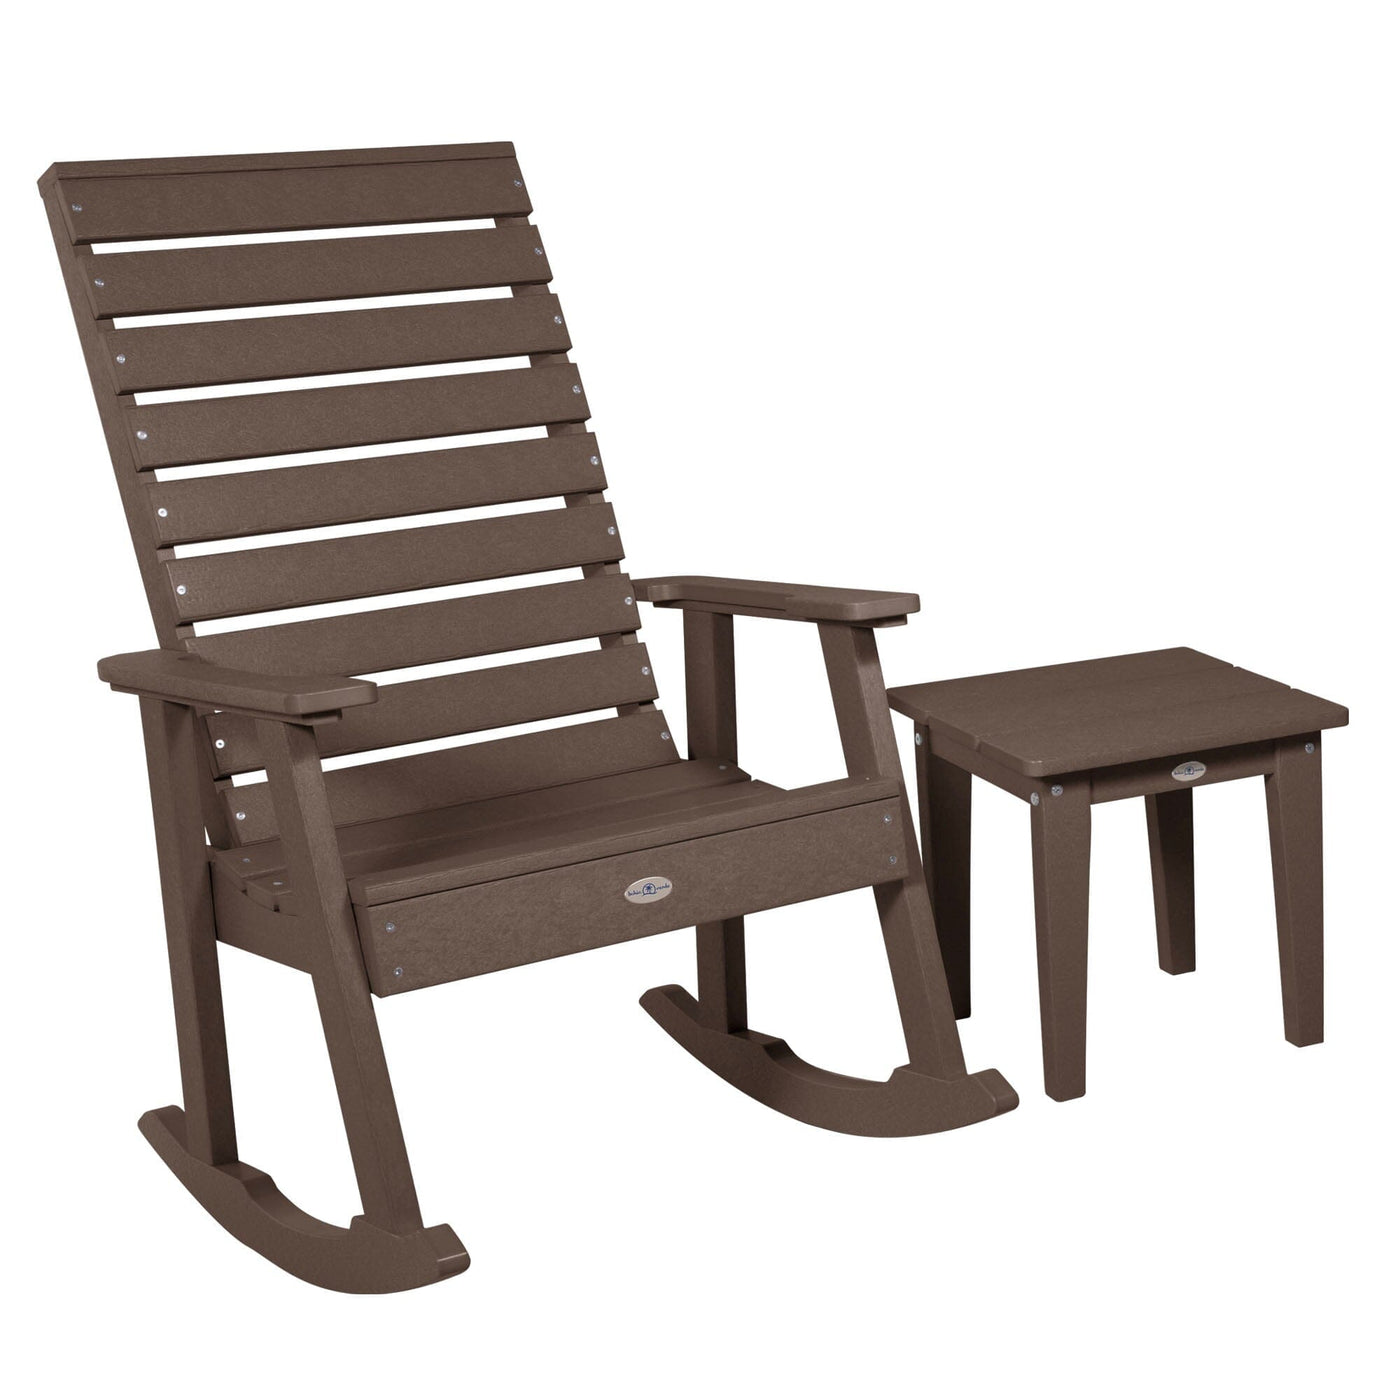 Riverside Rocking Chair and Side Table 2pc Set Kitted Set Bahia Verde Outdoors Mangrove Brown 